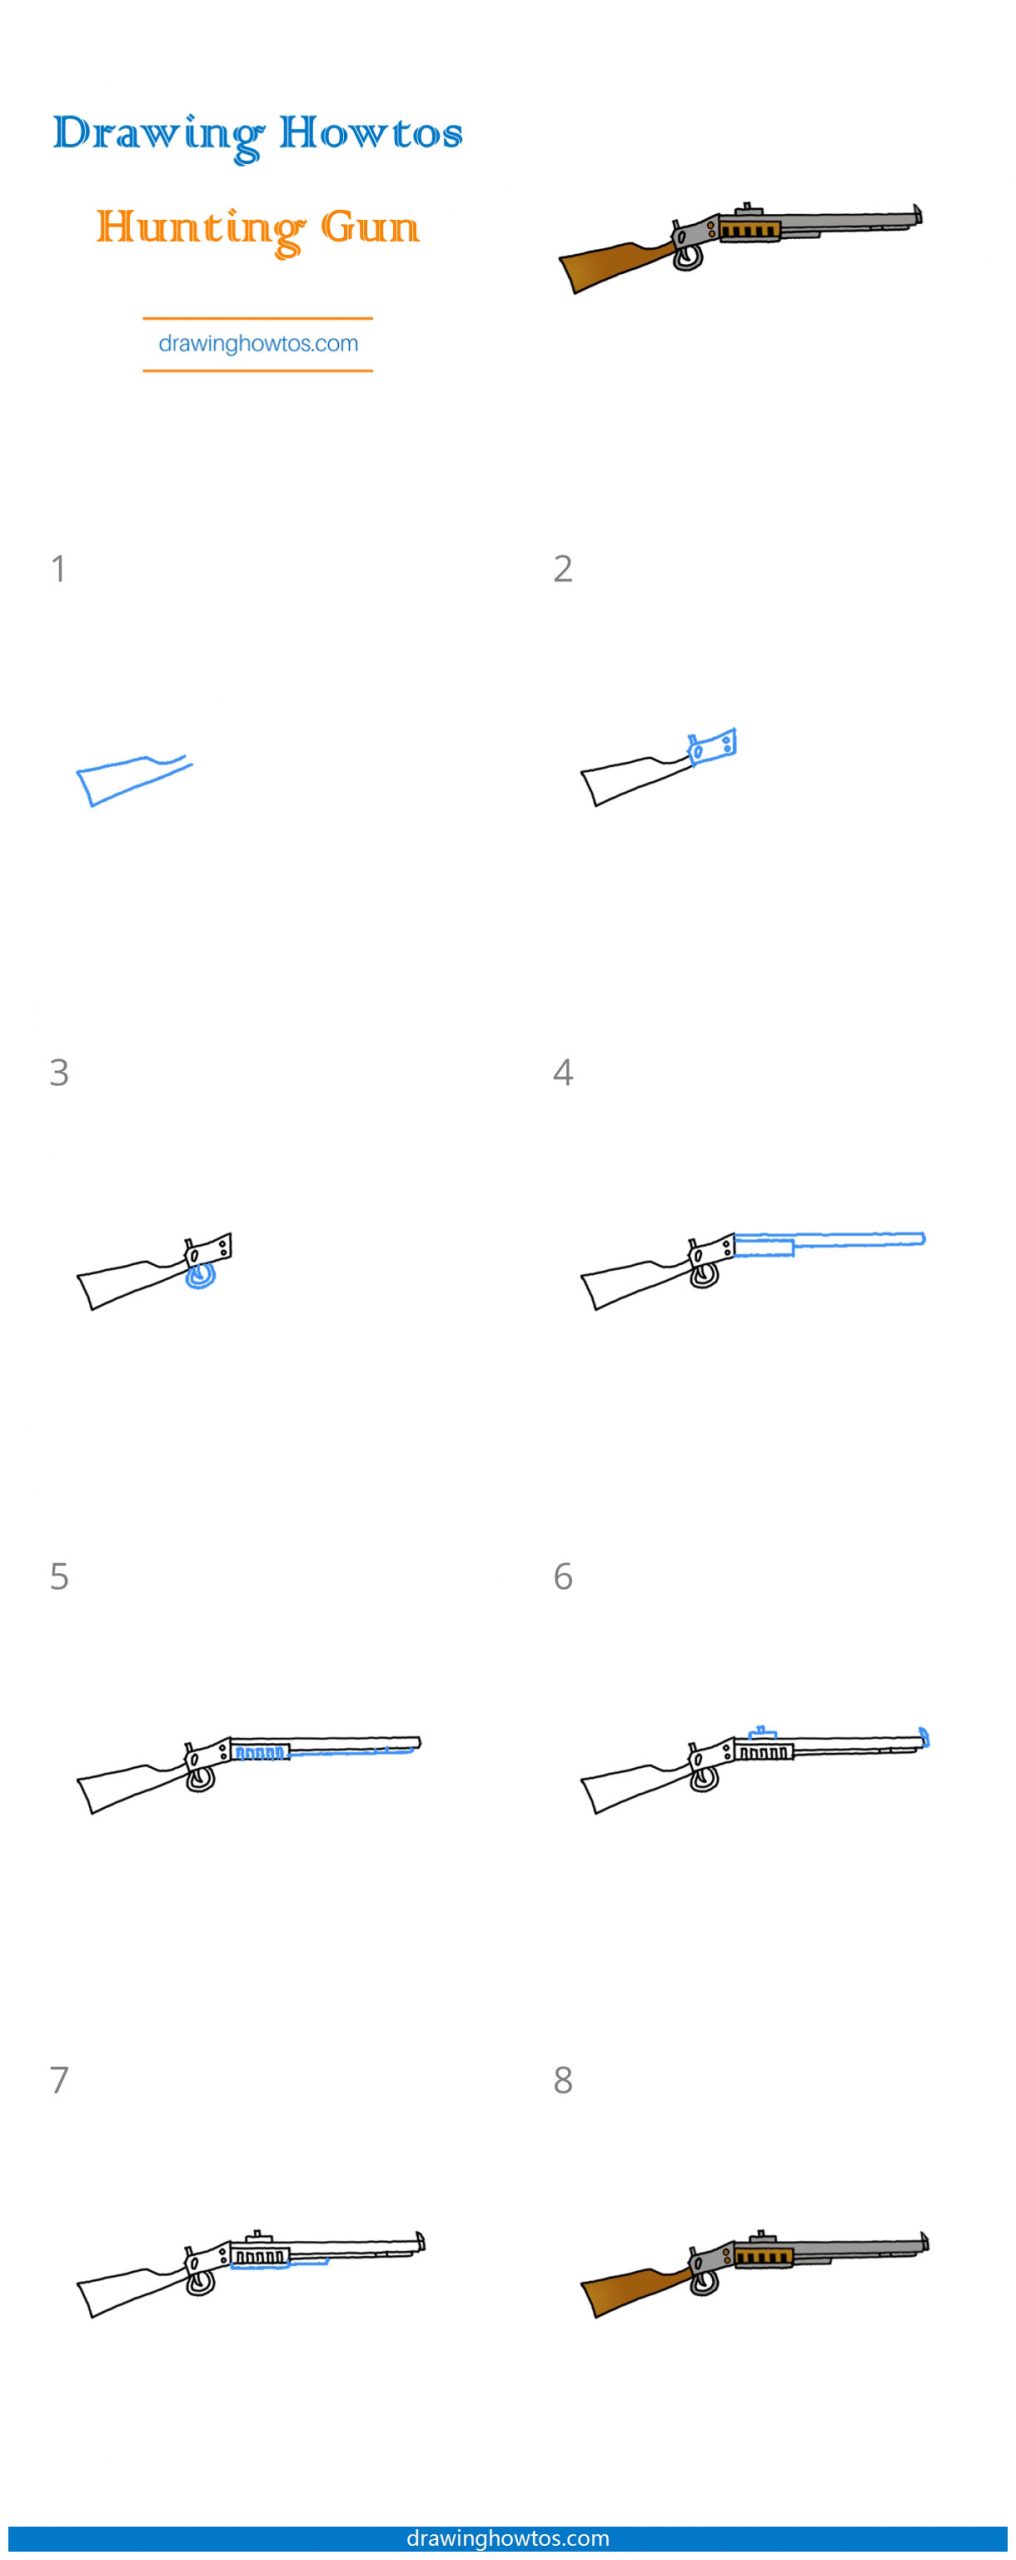 How to Draw a Hunting Gun Step by Step